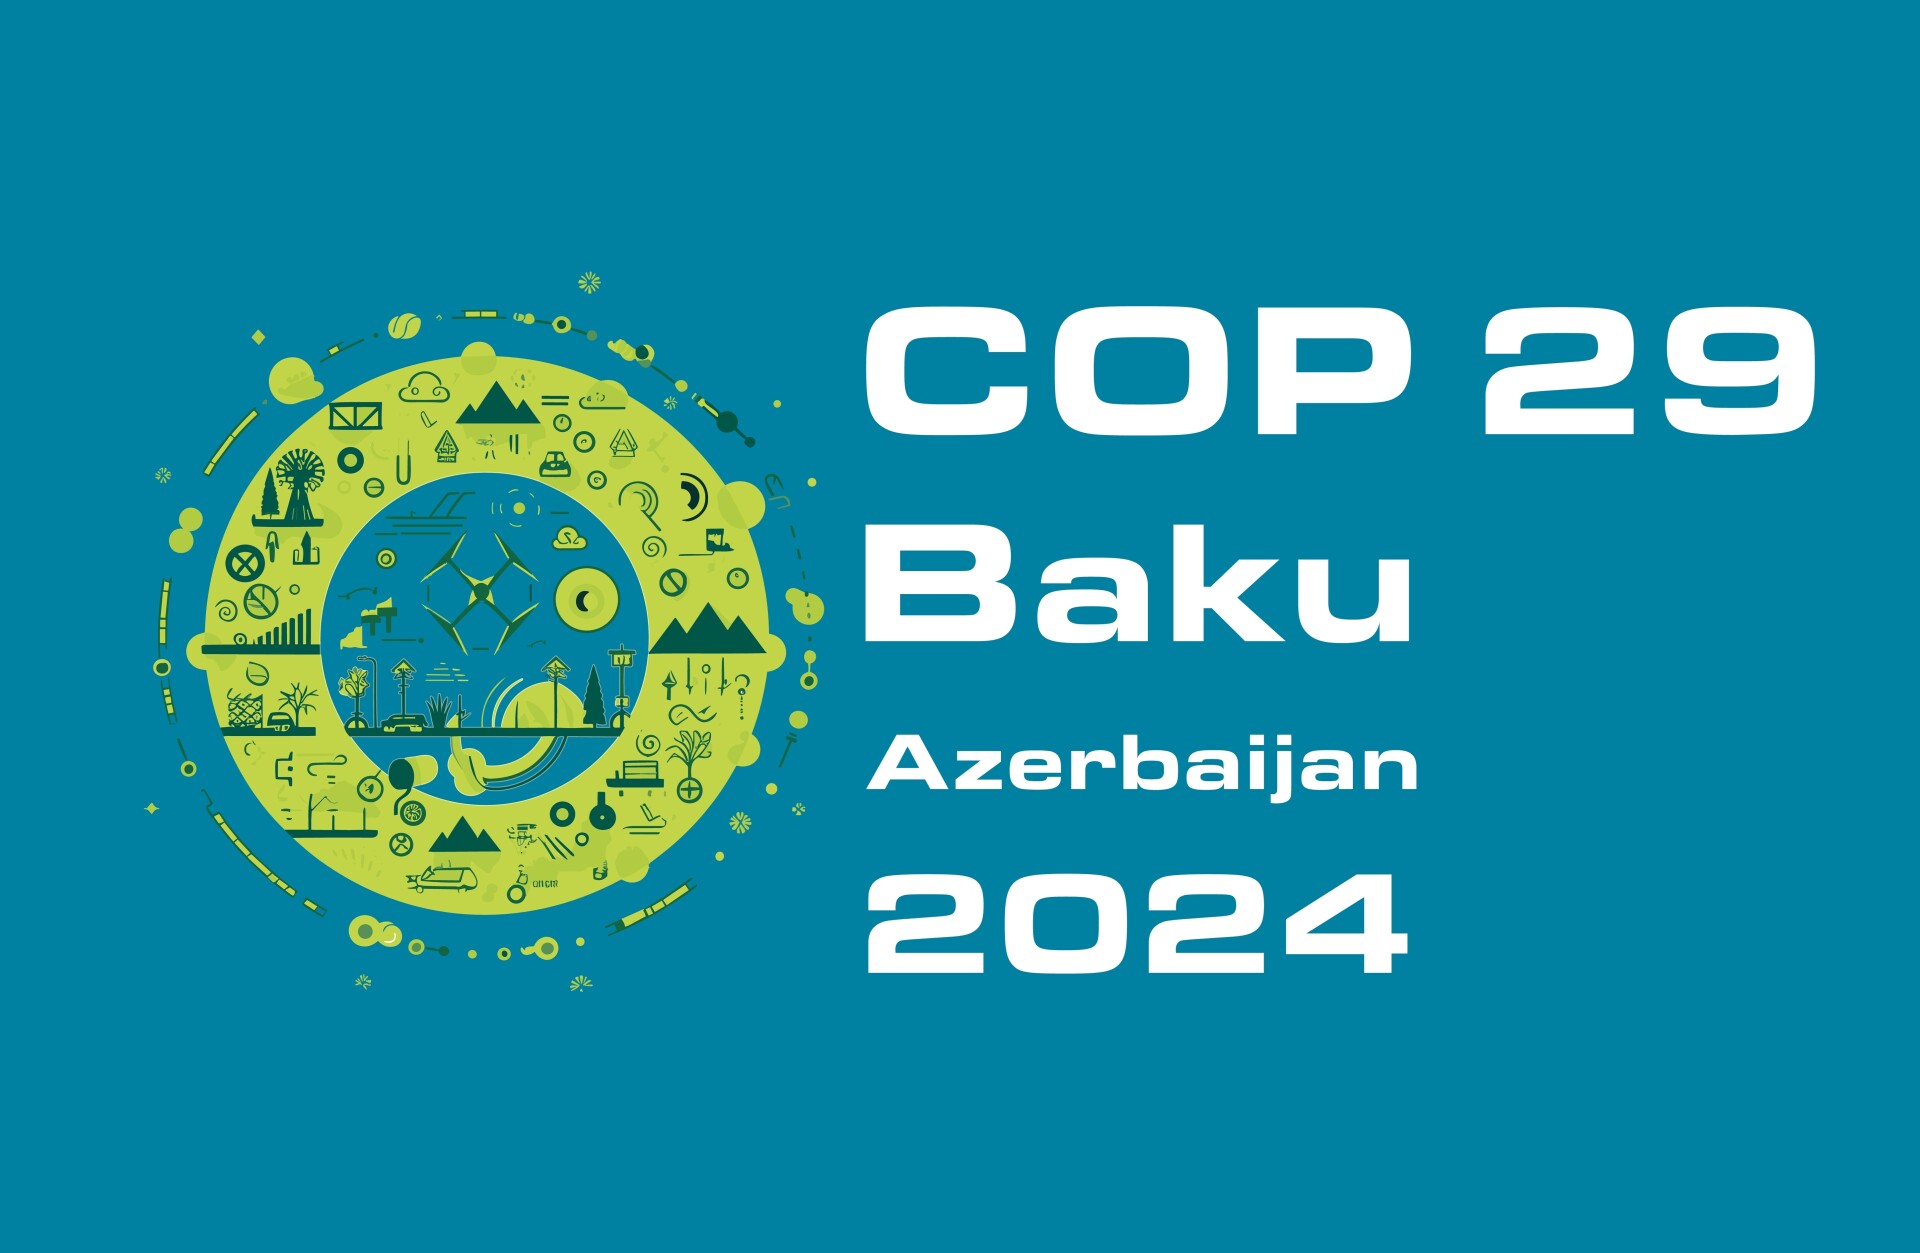 COP29 will take place from November 11 to 22, 2024, in Baku, capital of Azerbaijan.